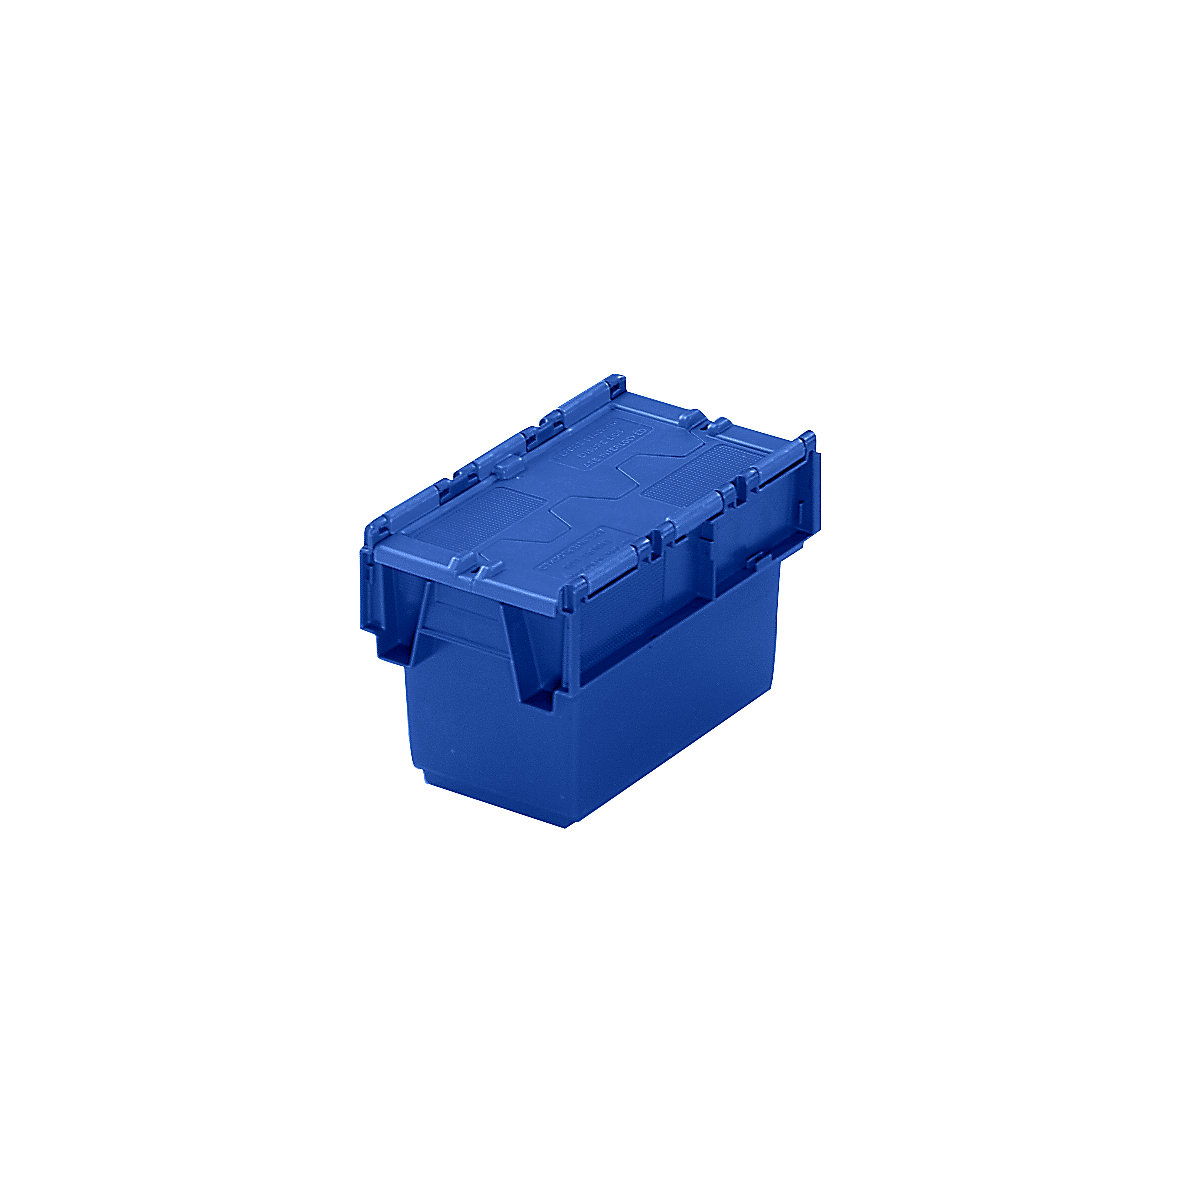 KAIMAN reusable stacking container, capacity 6 l, LxWxH 300 x 200 x 200 mm, blue-4